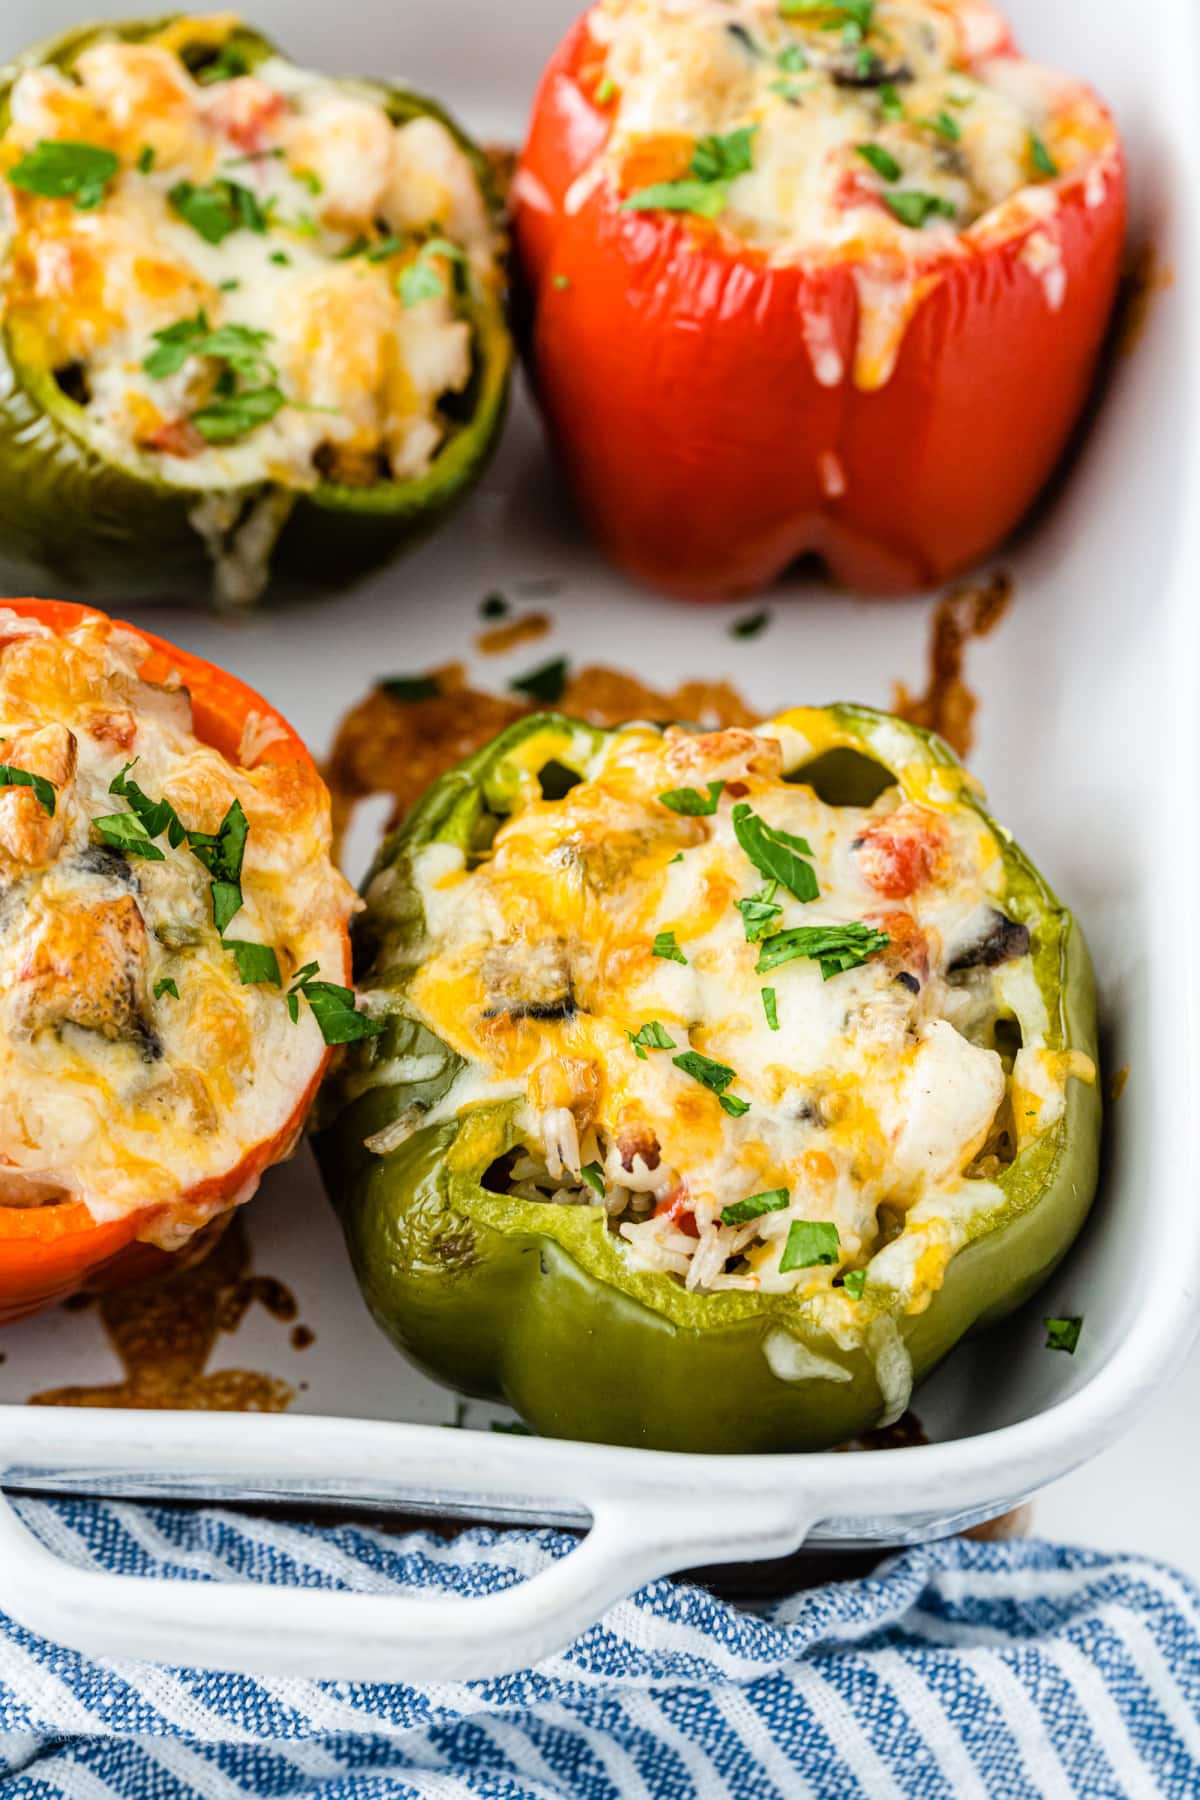 Stuffed green pepper with melted cheese